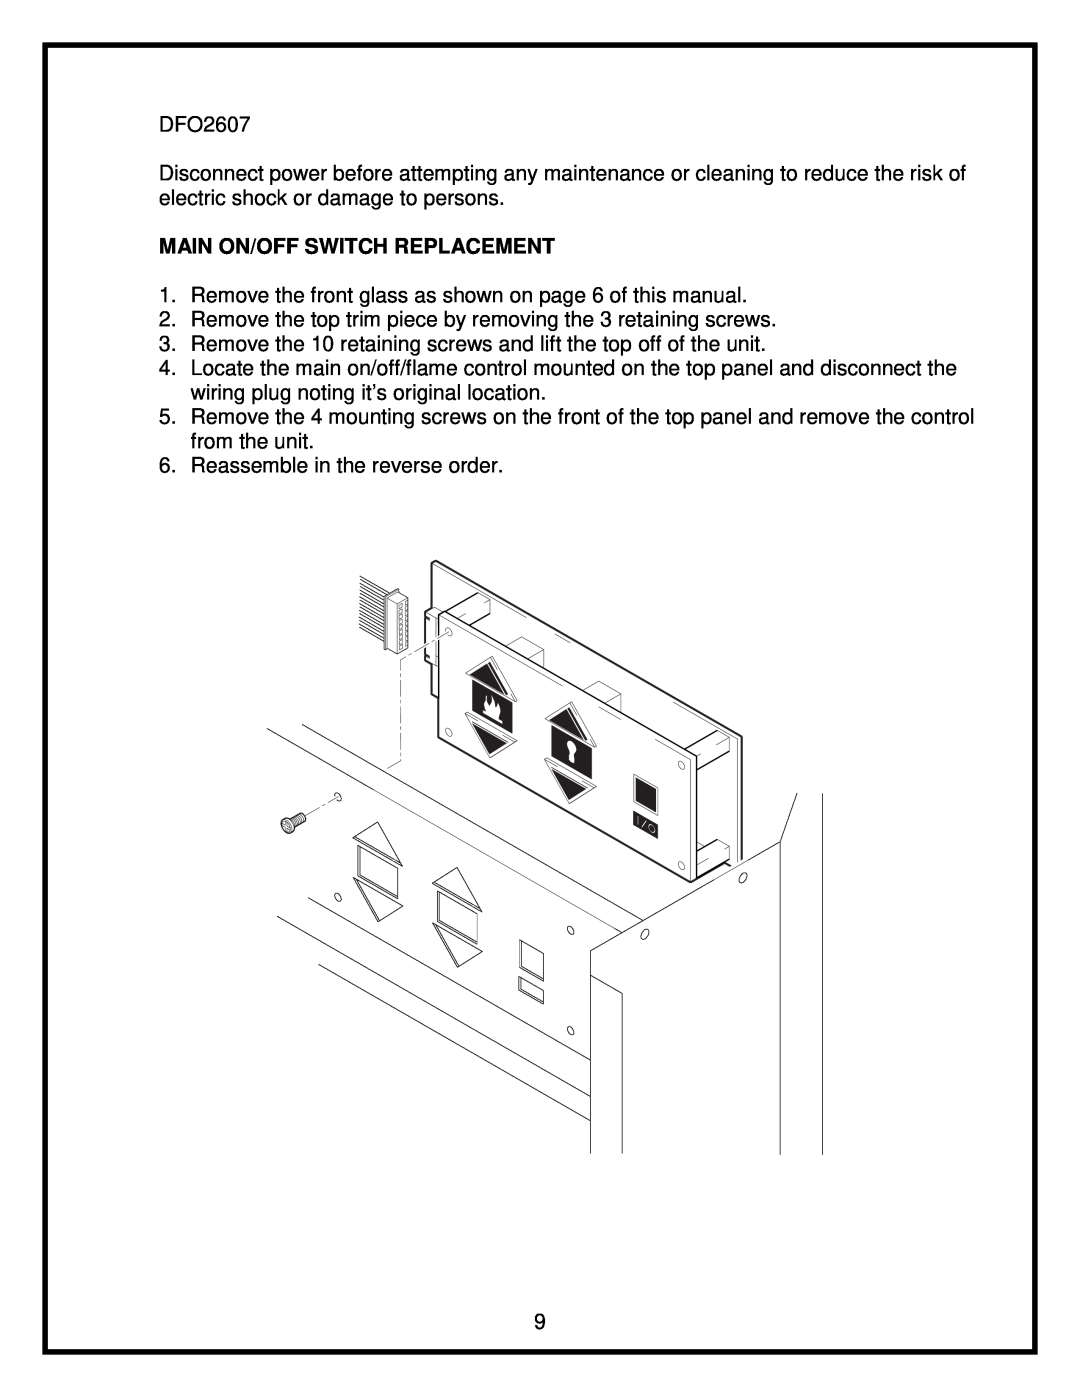 Dimplex 26 service manual Main On/Off Switch Replacement 